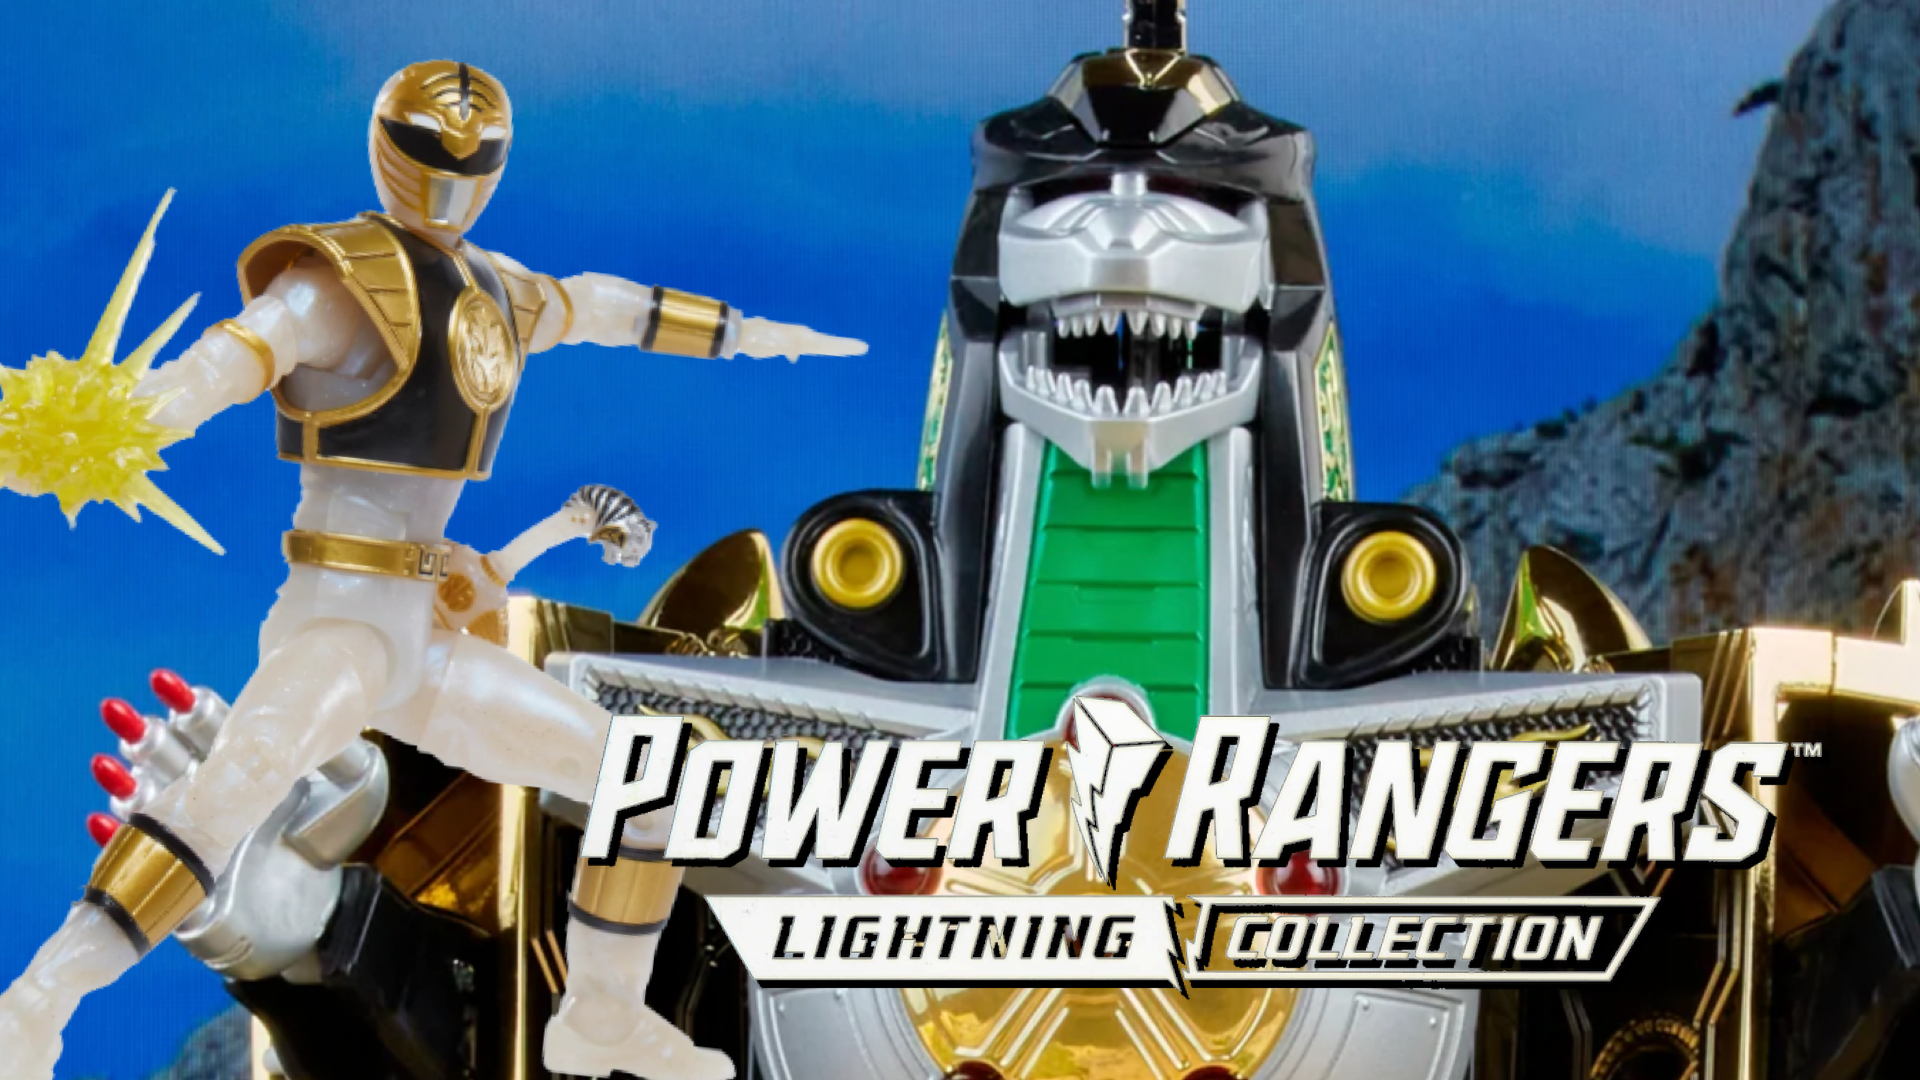 Power Rangers: Hasbro Launches New Lightning Collection Tommy Oliver Items At SDCC